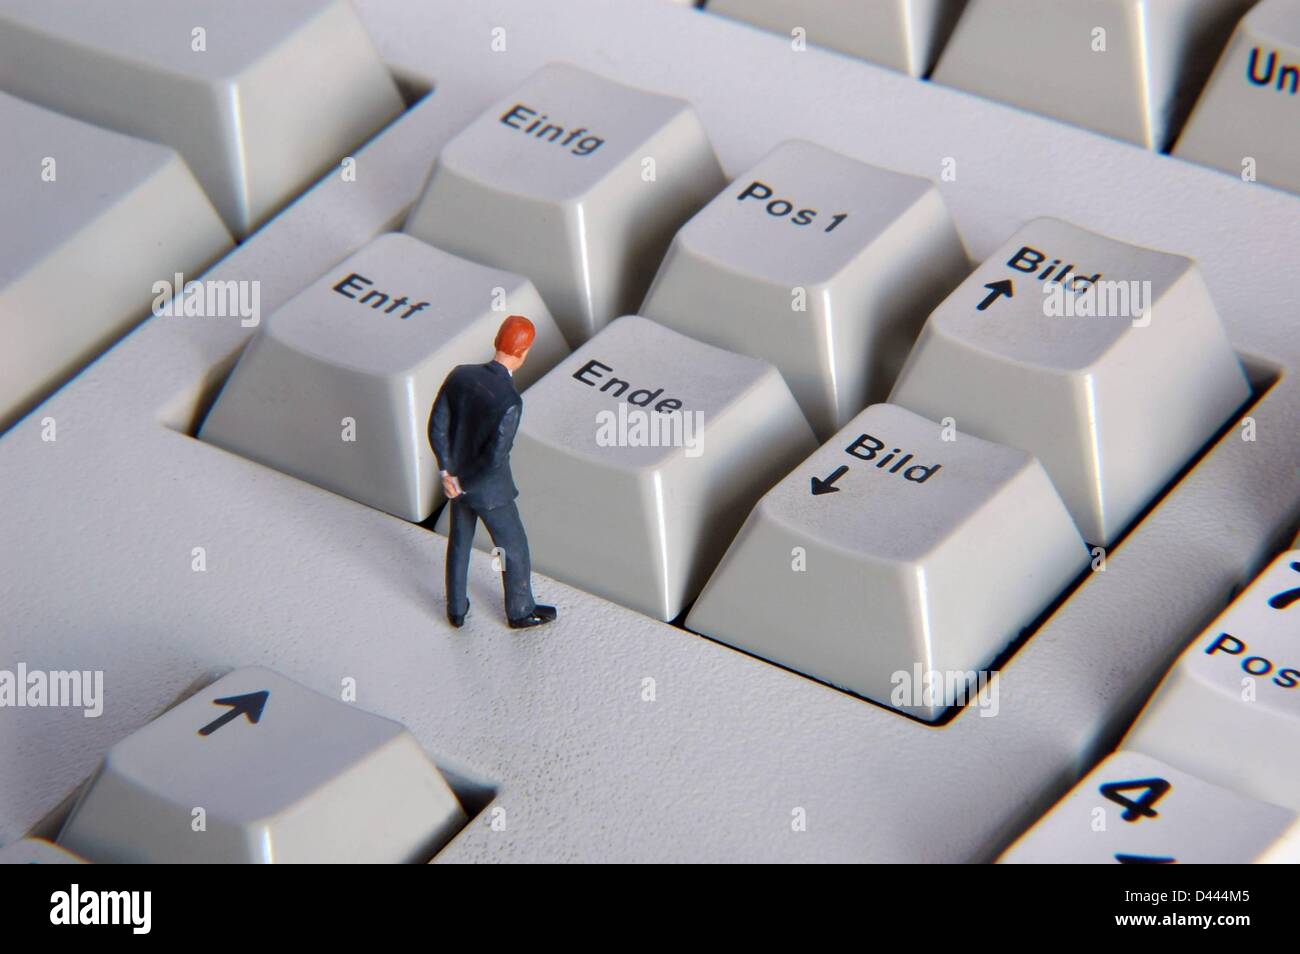 Illustration - A miniature manager figure is pictured in front of the 'Ende' (End) key of a PC keyboard in Berlin, Germany, 29 December 2007. Fotoarchiv für ZeitgeschichteS.Steinach Stock Photo